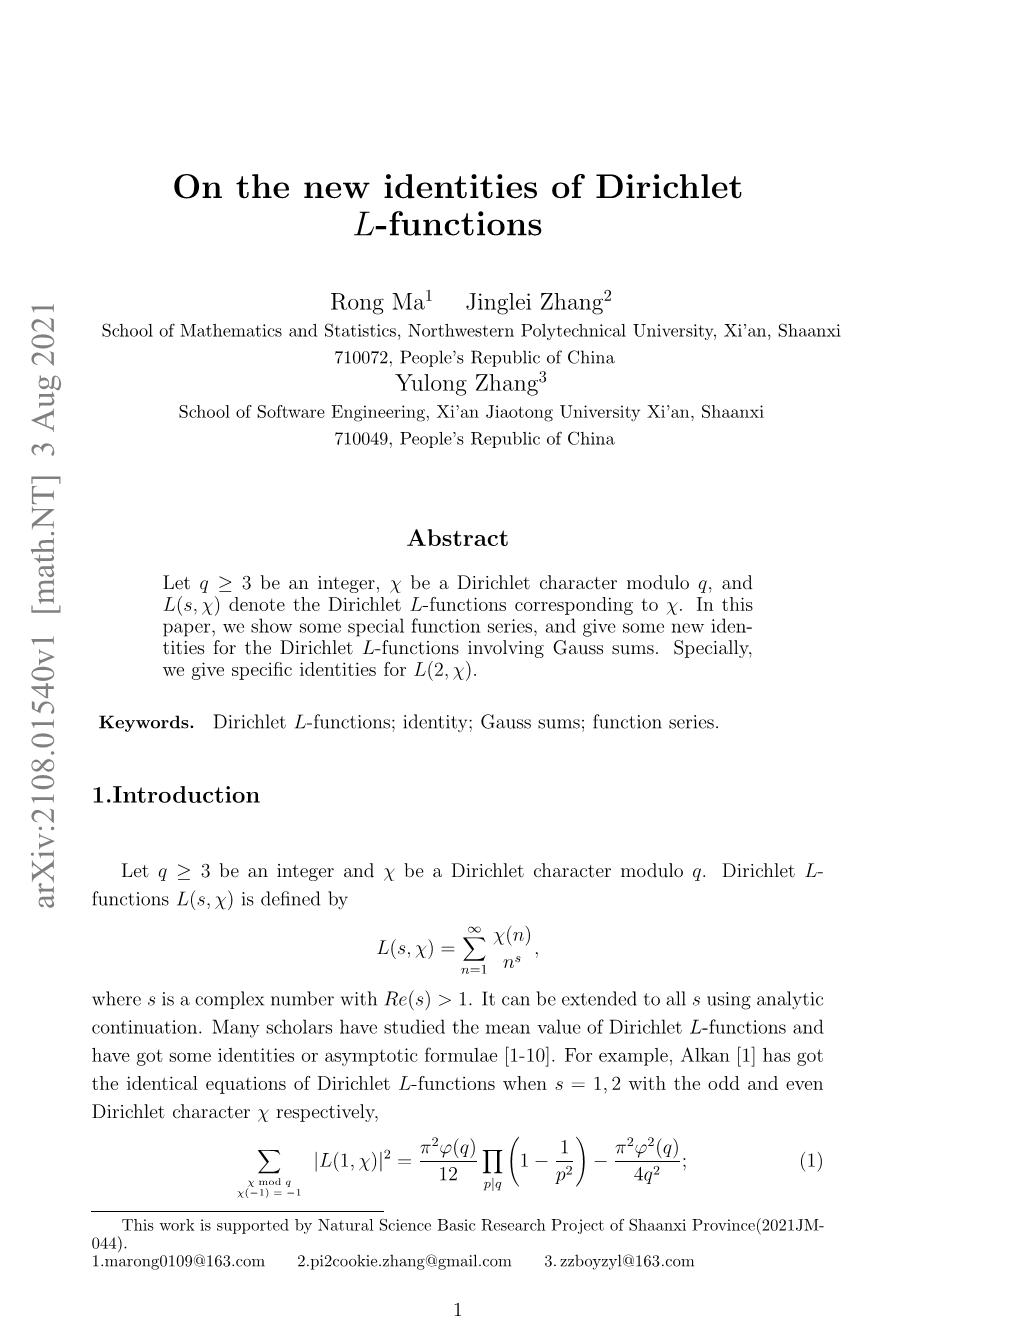 On the New Identities of Dirichlet L-Functions